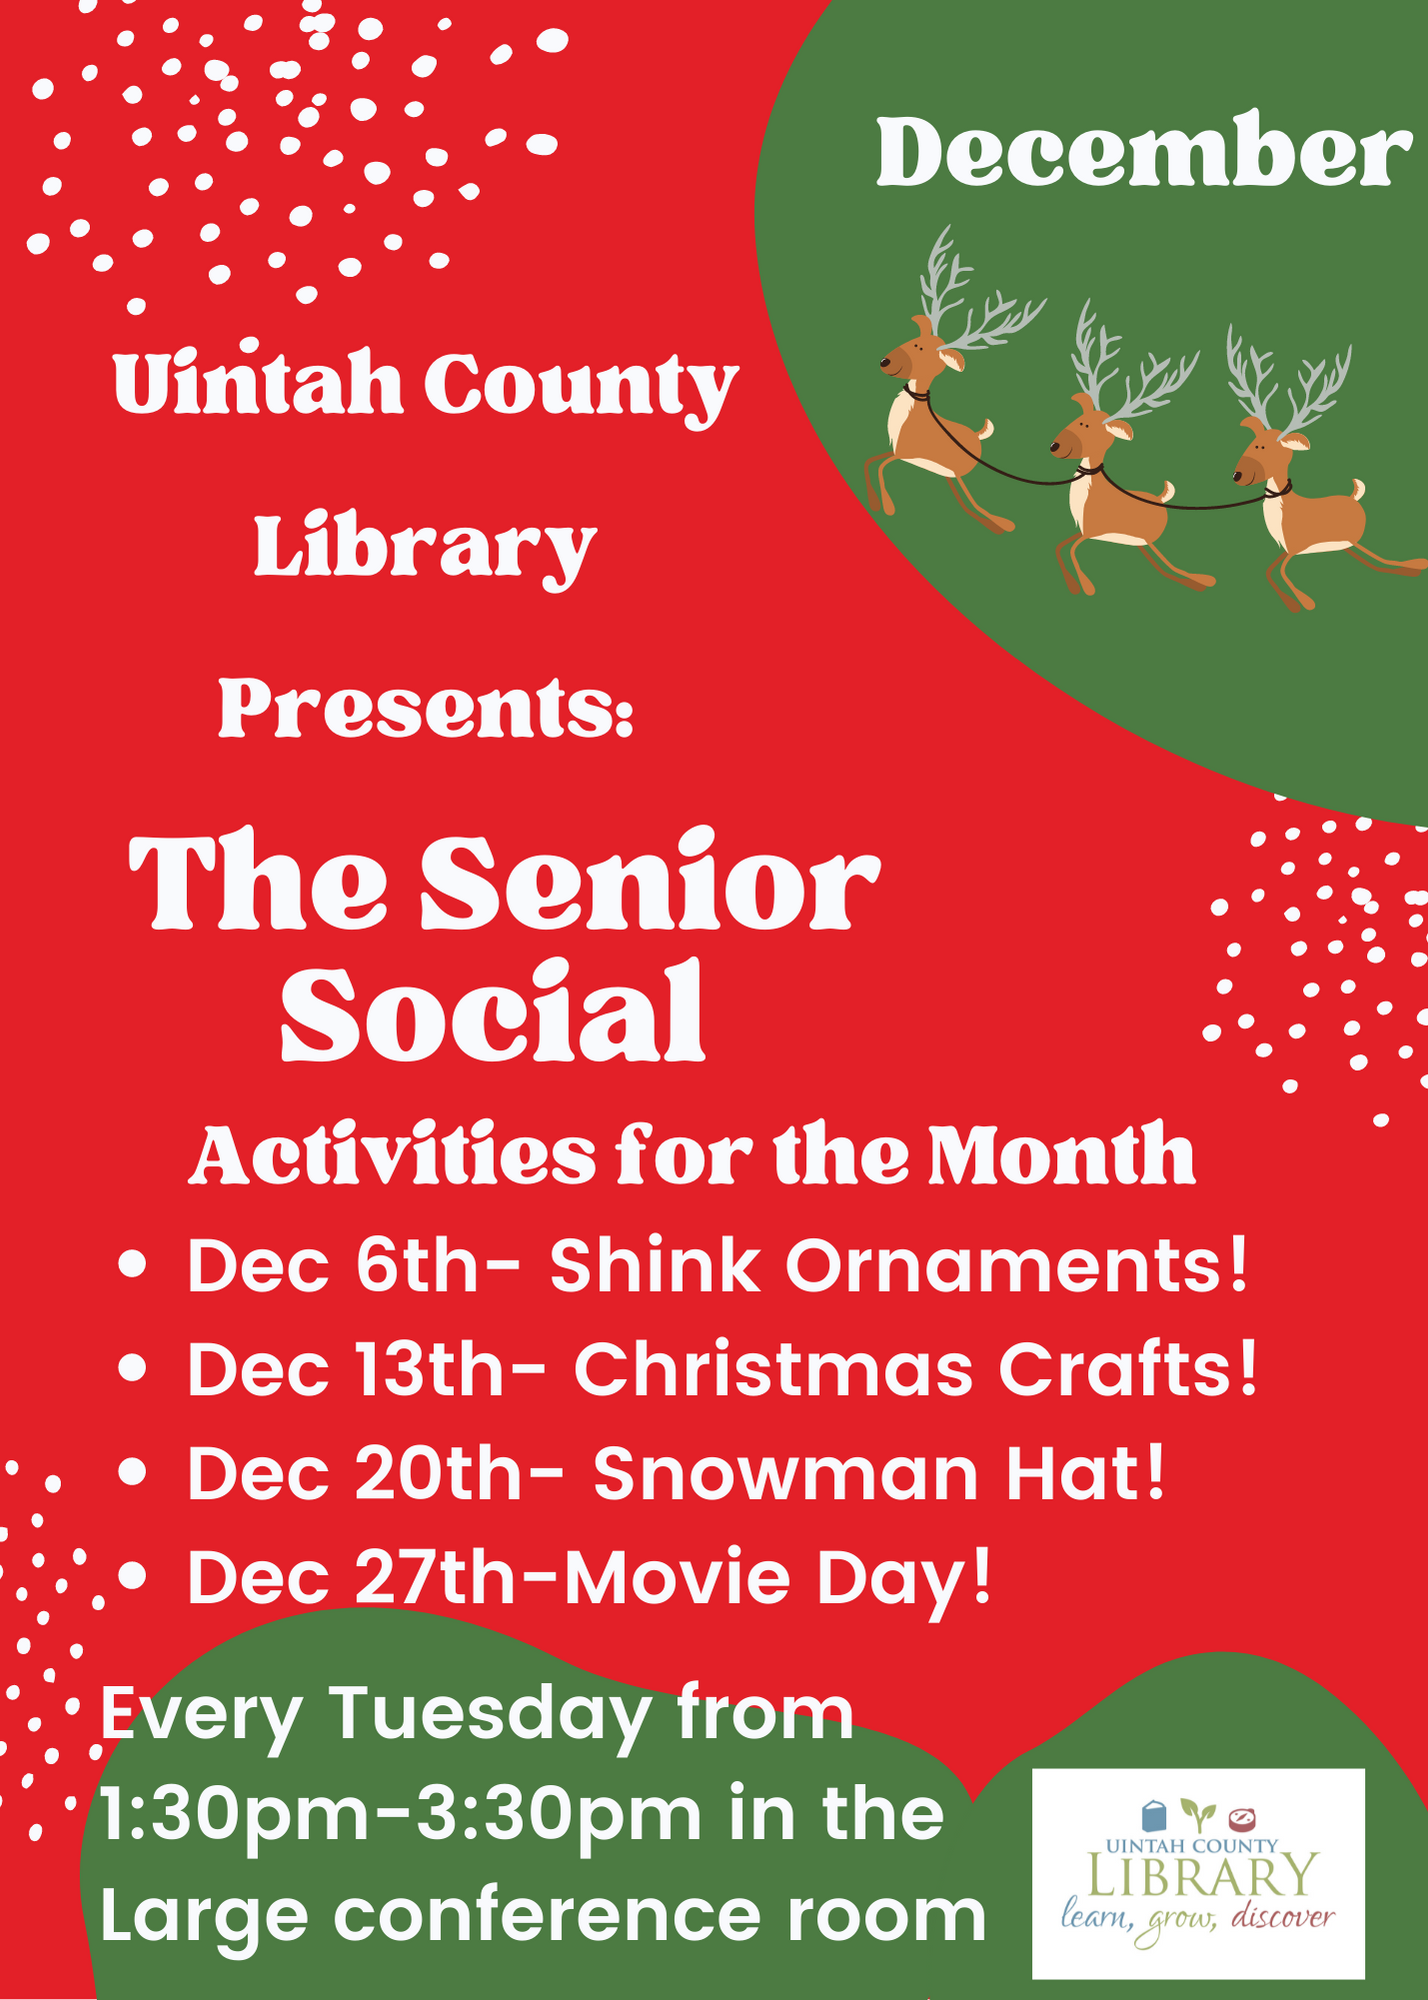 The Senior Social: Activities for the Month -Dec 6th- Shrink Ornaments! -Dec 13th- Christmas Crafts! -Dec 20th-Snowman Hat! -Dec 27th- Movie Day! Every Tuesday from 1:30pm-3:30pm in the Large Conference Room